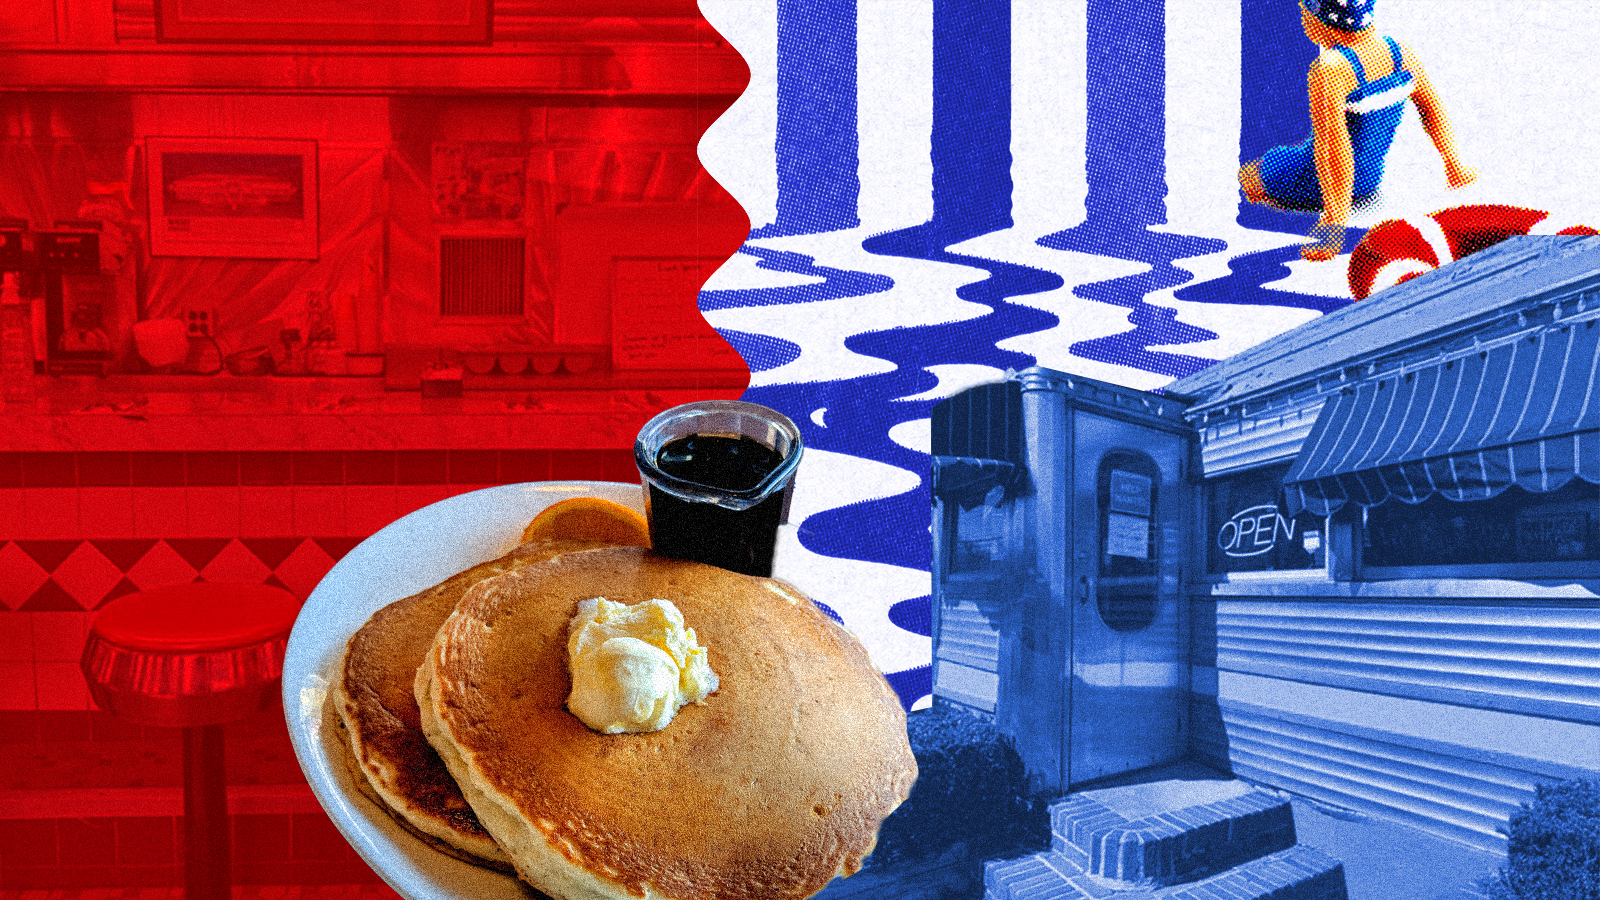 a collage of diner-themed images including the exterior of a classic diner, a diner bar, and a plate of pancakes